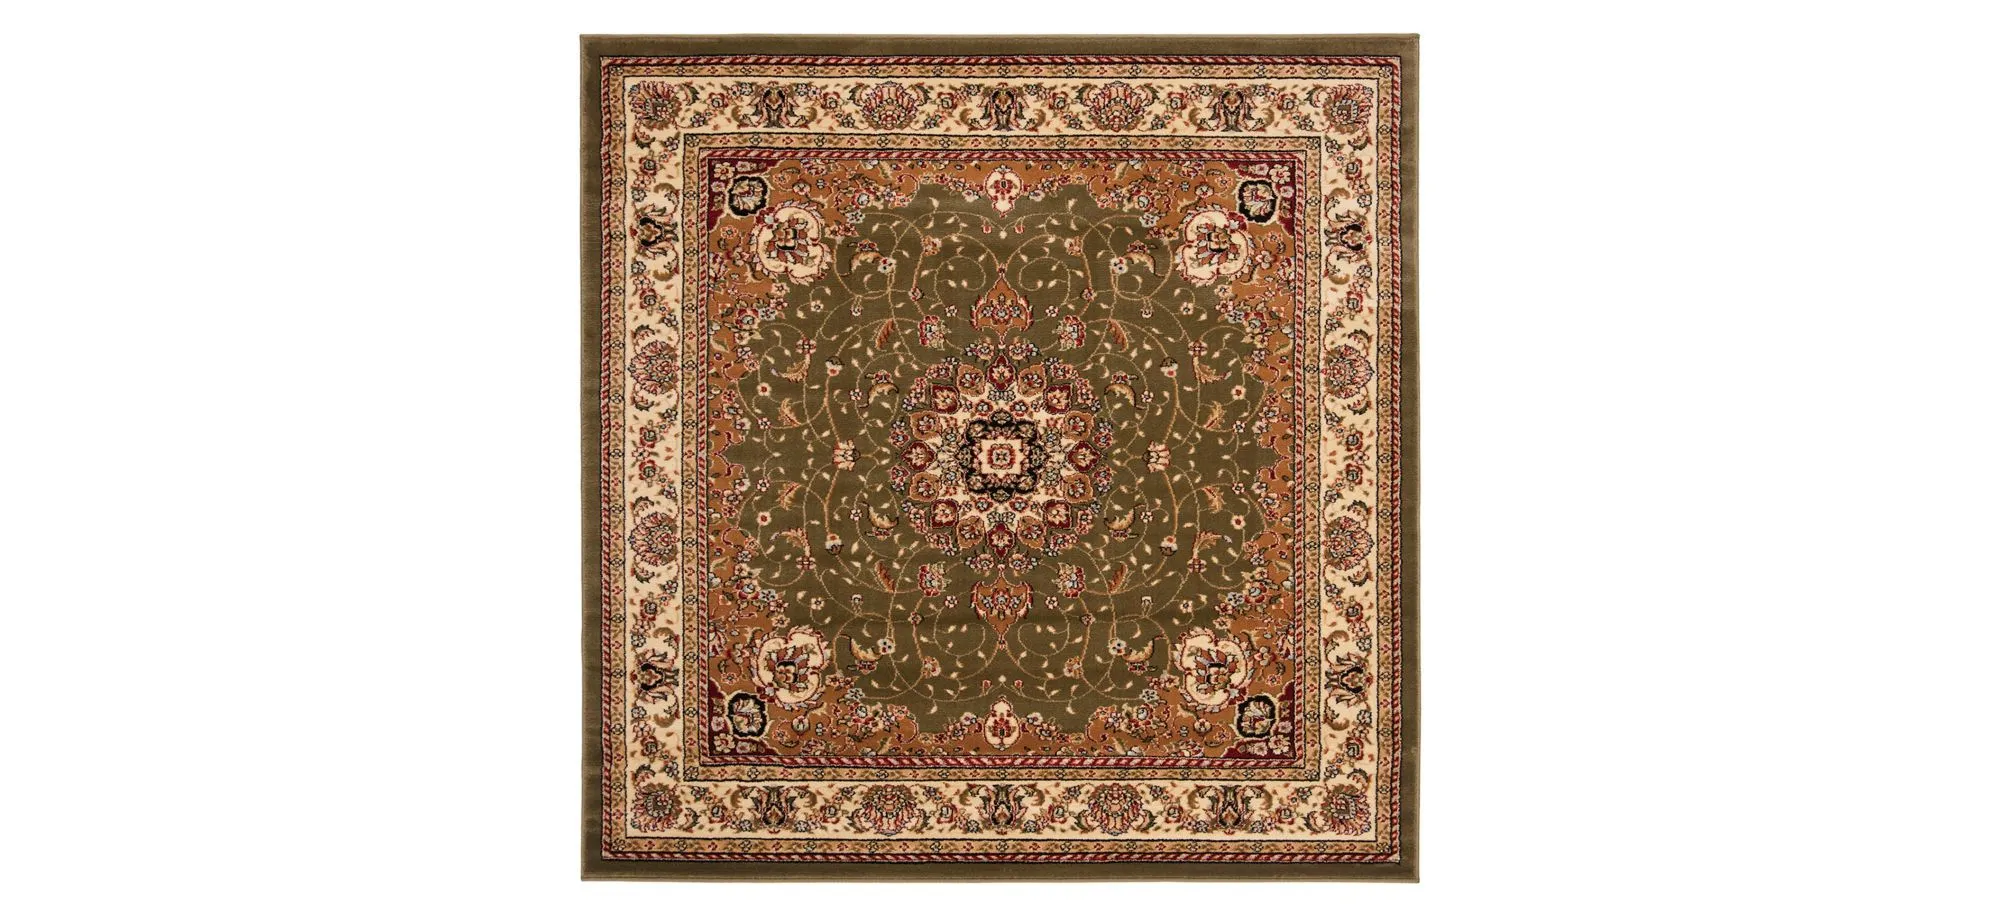 Wessex Area Rug in Sage / Ivory by Safavieh